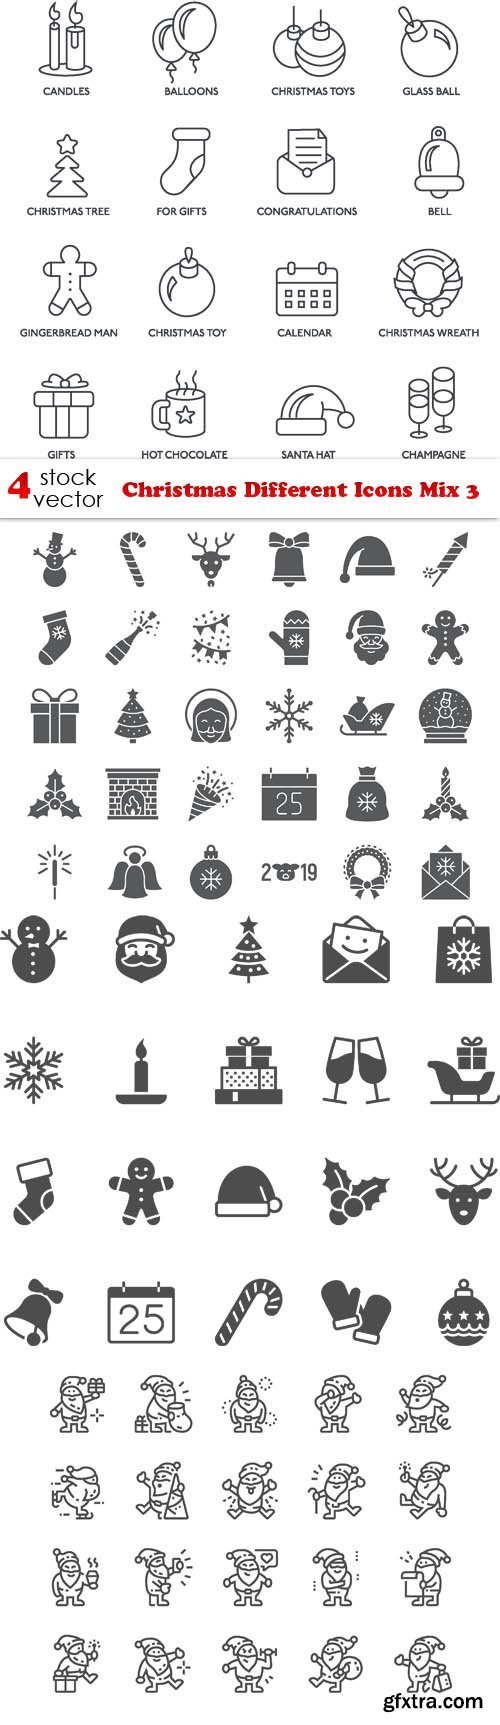 Vectors - Christmas Different Icons Mix 3